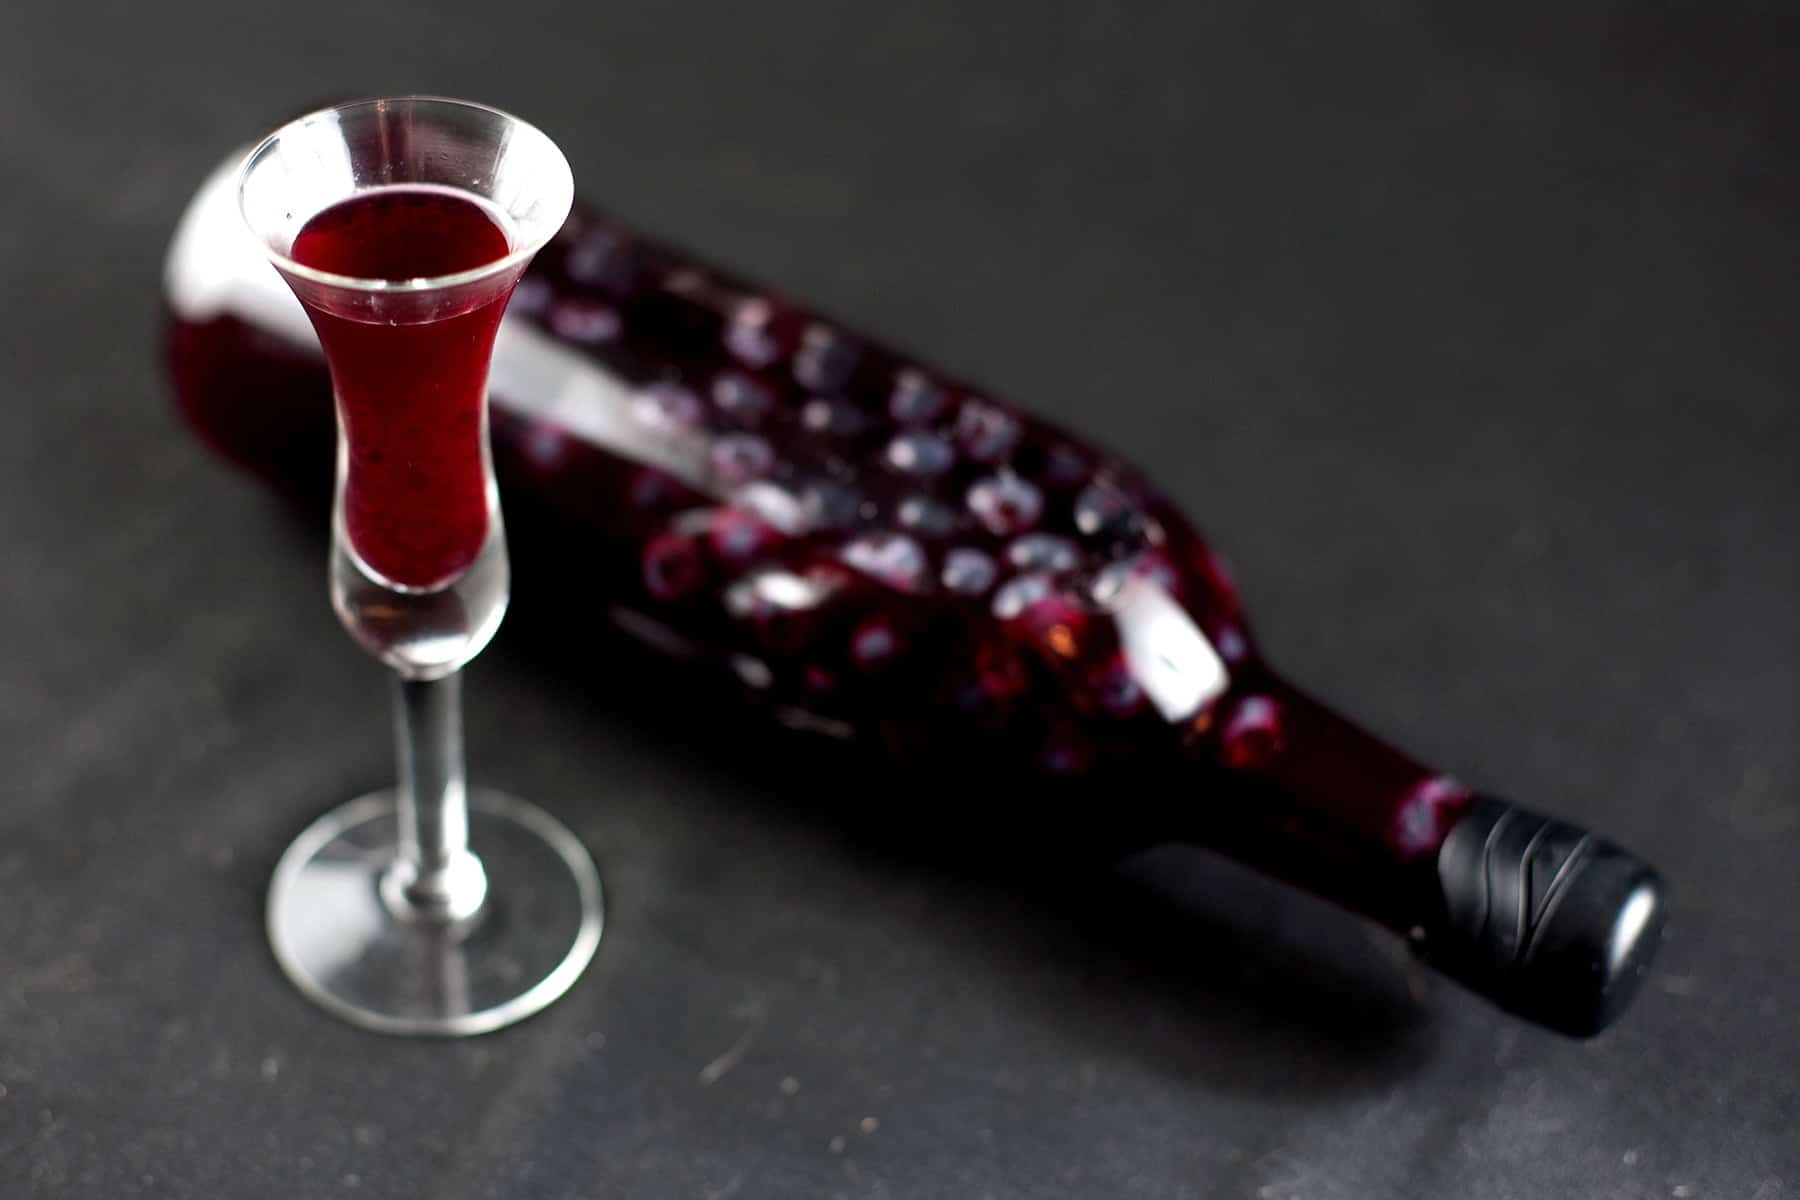 A wine bottled filled with dark purple liqueur and floating blueberries is pictured next to a fluted shot glass filled with the dark purple liquid.